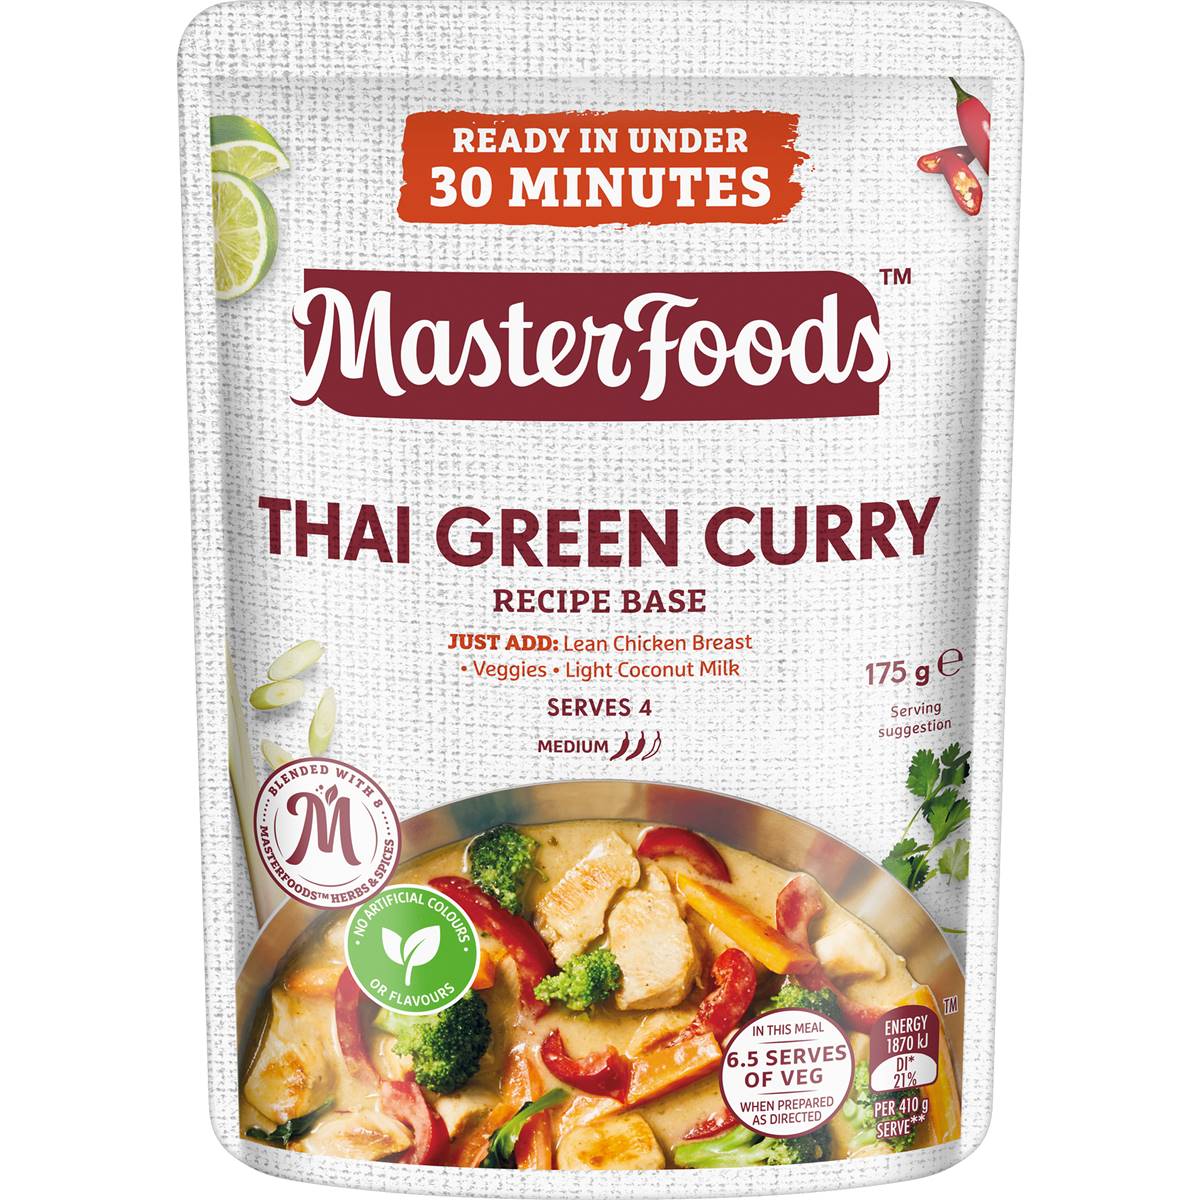 Masterfoods Recipe Base Thai Green Curry